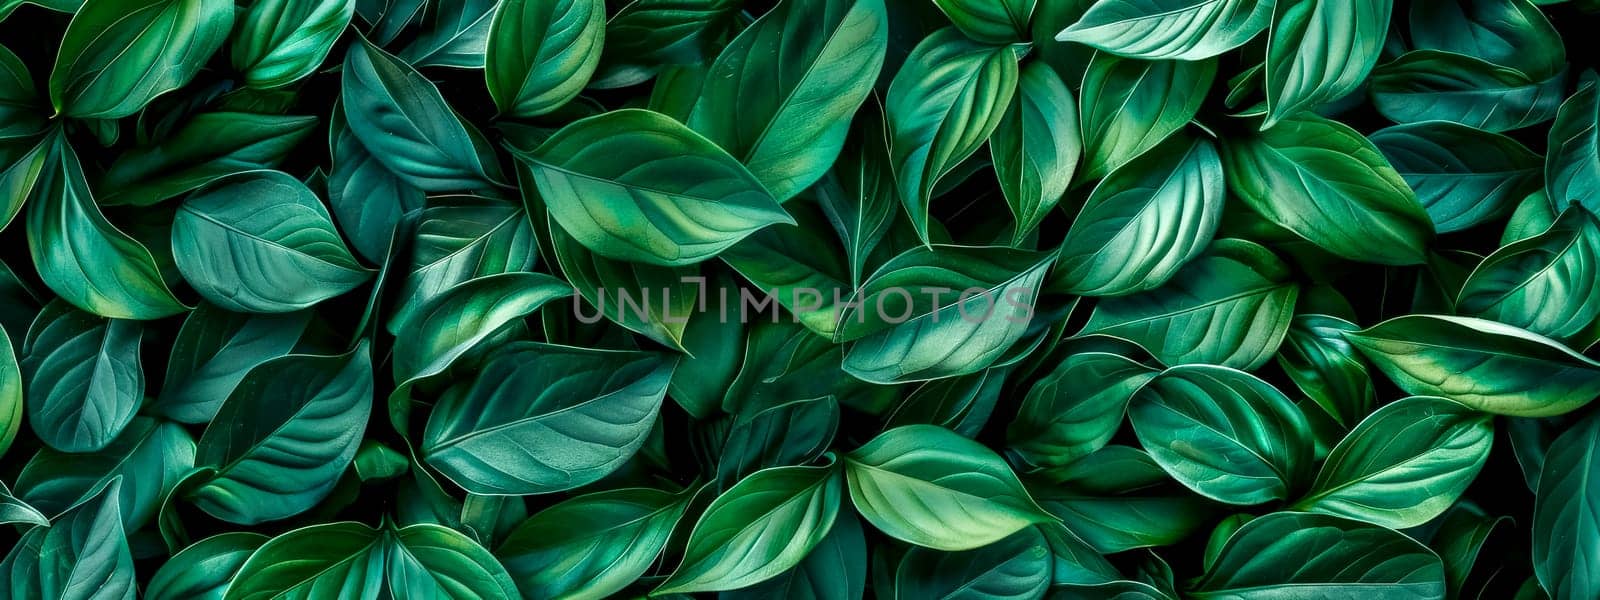 Full frame of dense, vibrant green leaves, showcasing natural patterns and textures